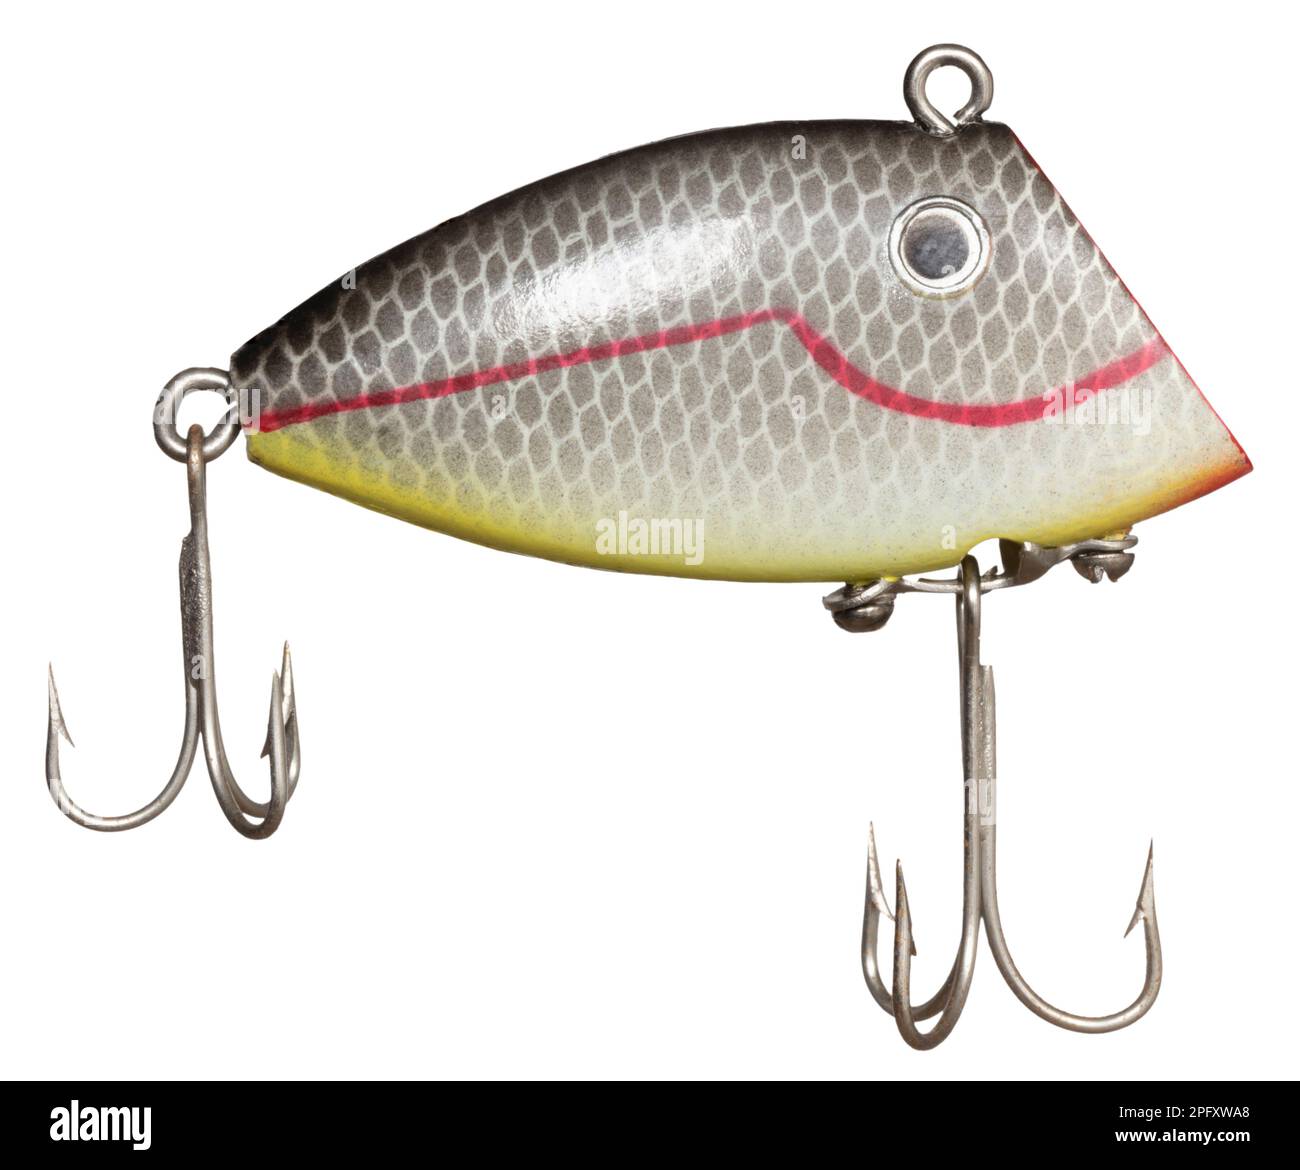 Artificial crankbait fishing lure with a flat face for working